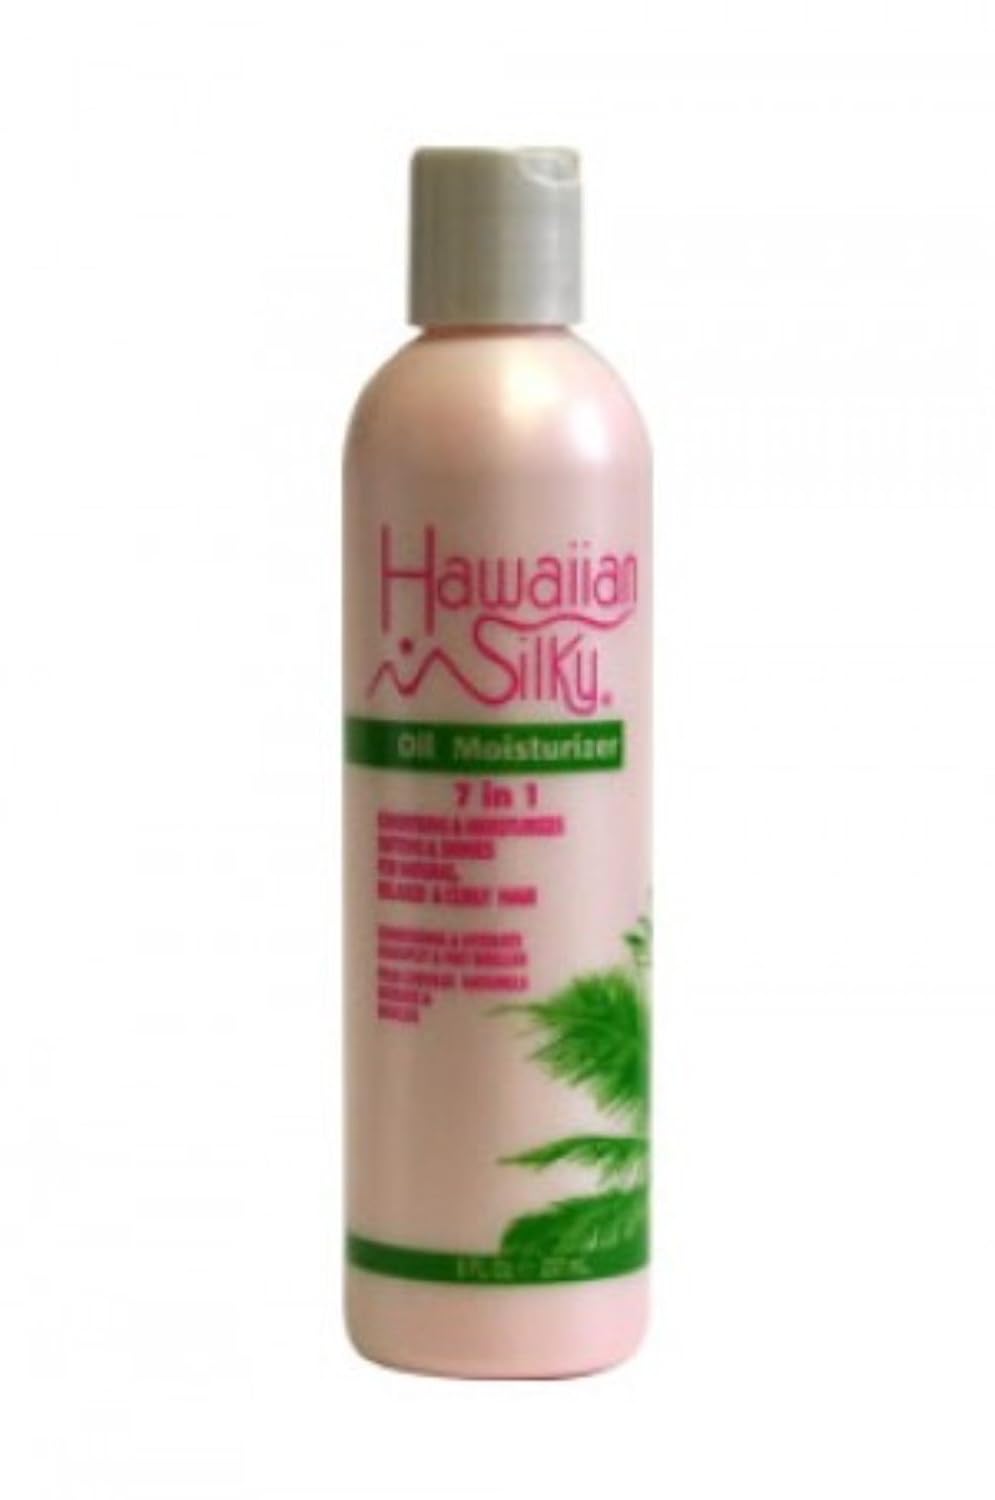 Hawaiian Silky 7-in-1 oil moisturizer, Pink, 8 Fl Ounce : Hair Care Products : Beauty & Personal Care